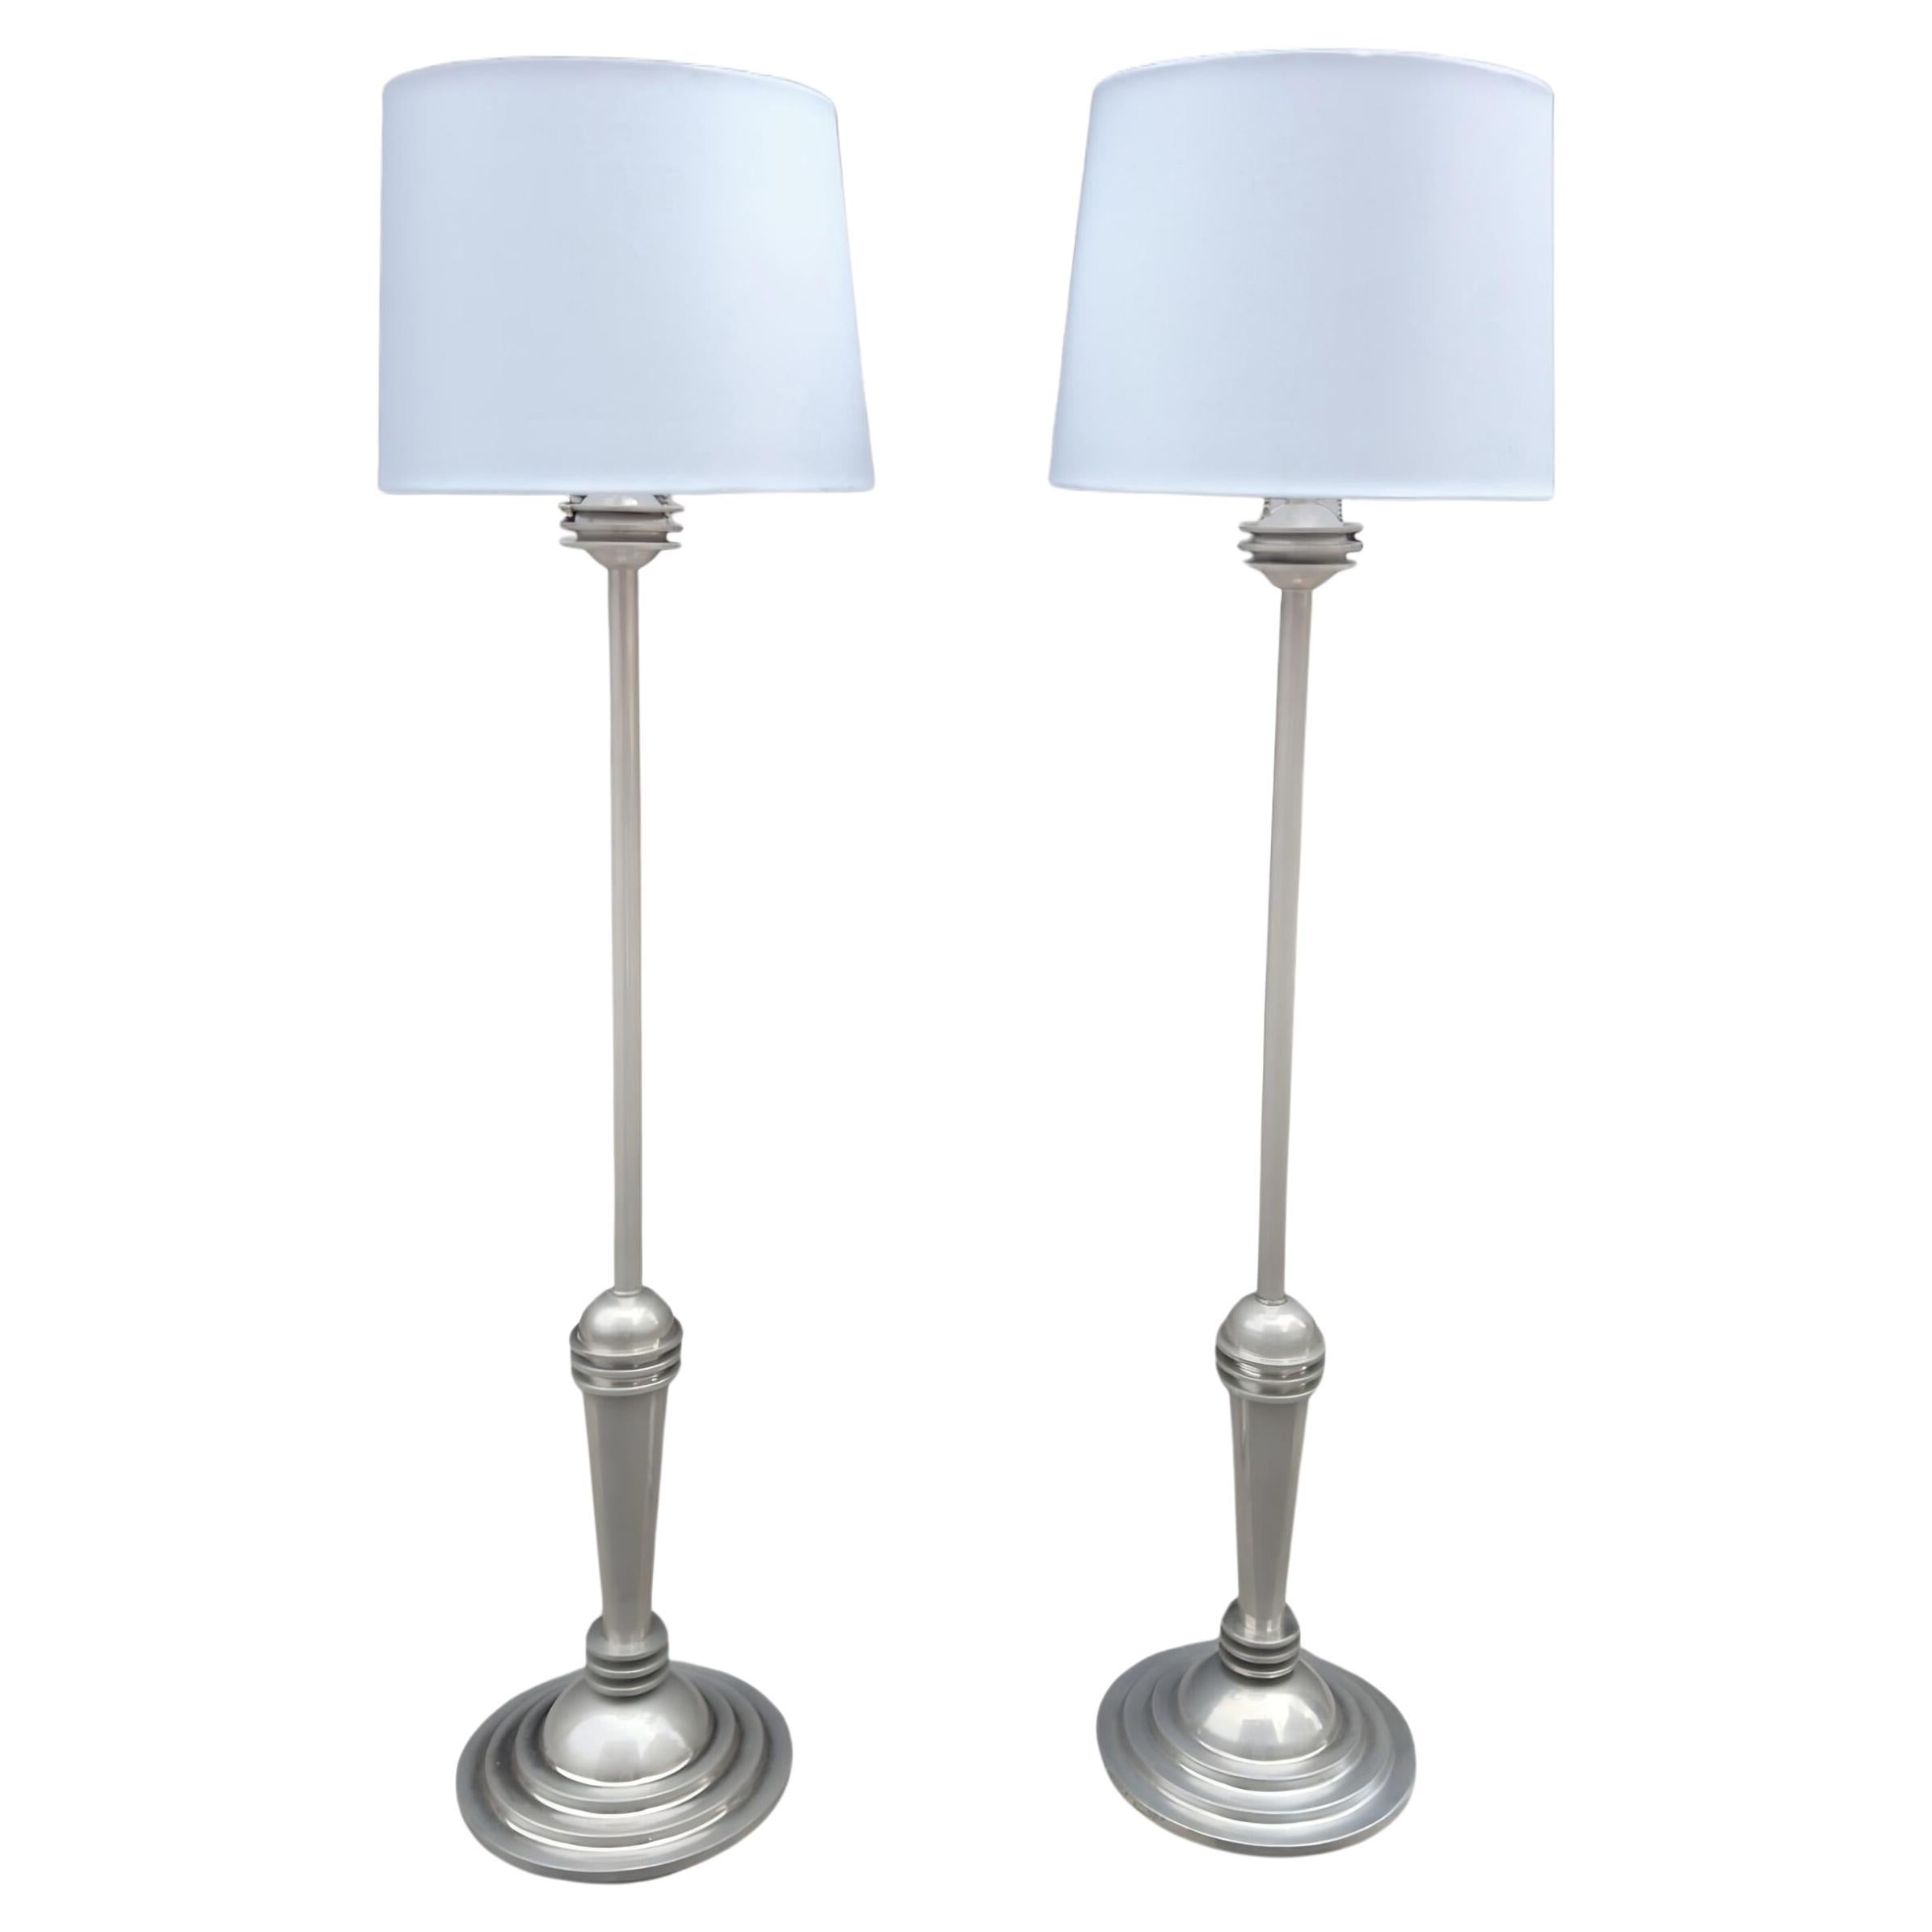 Pair of Late 20th Century Chrome Art Deco Floor Lamps by Woka Labs For Sale